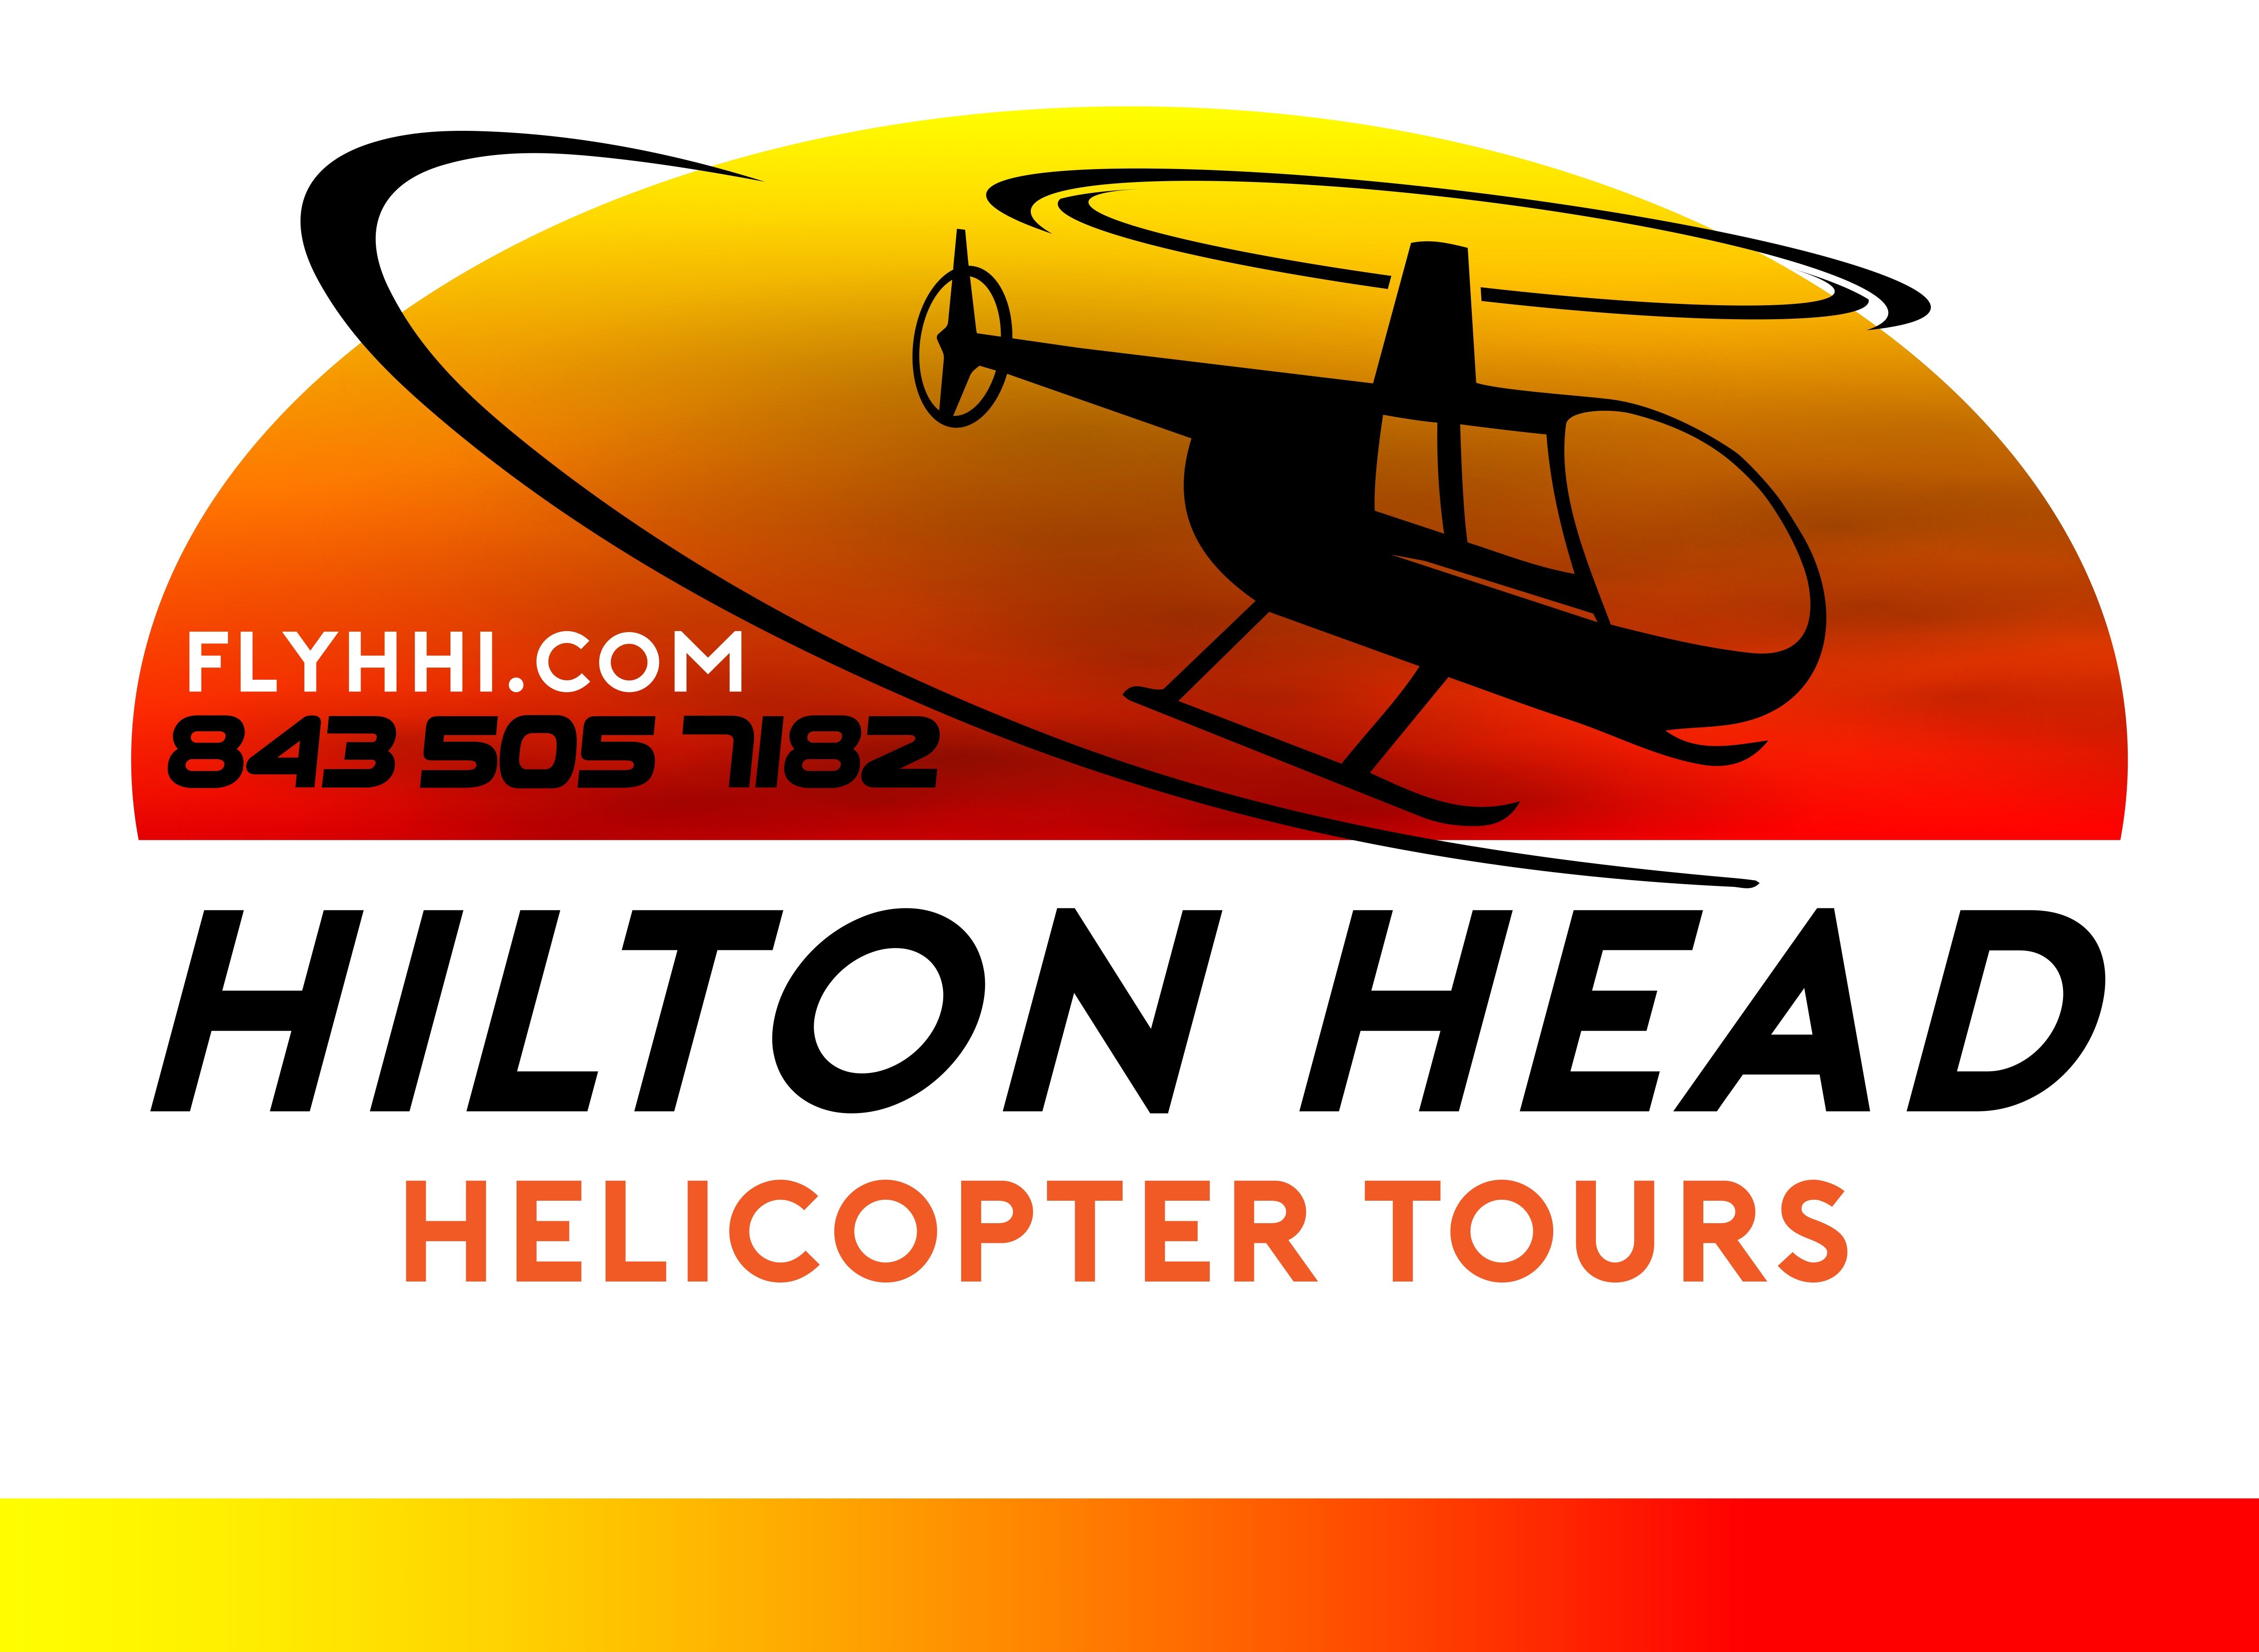 Helicopter tour